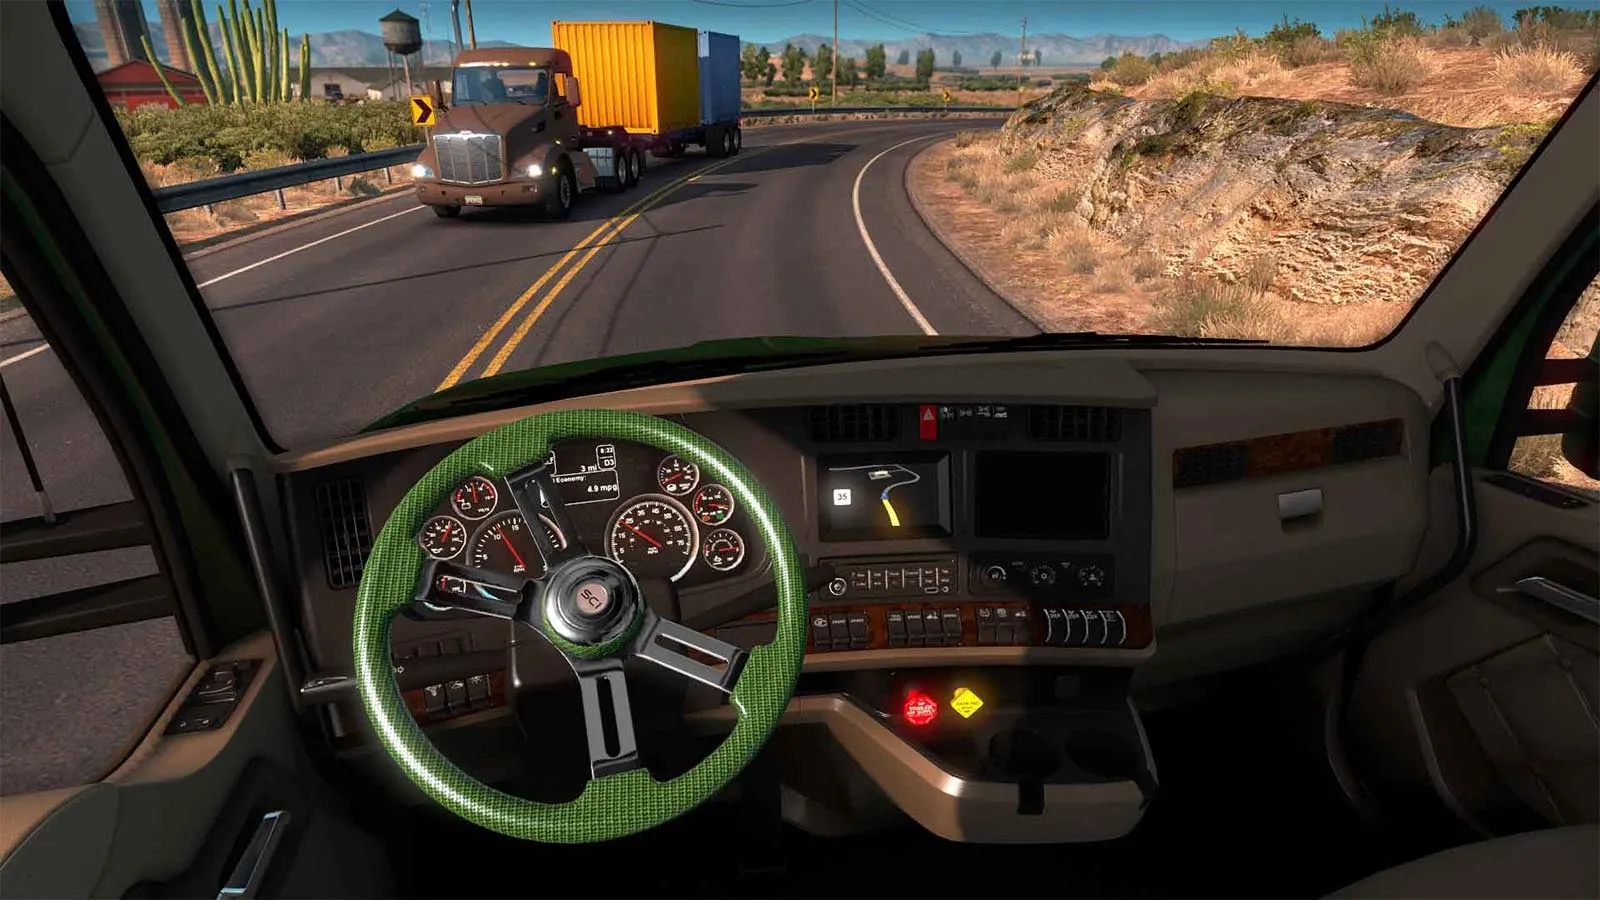 Big rigs and buttons: Unpacking 'American Truck Simulator